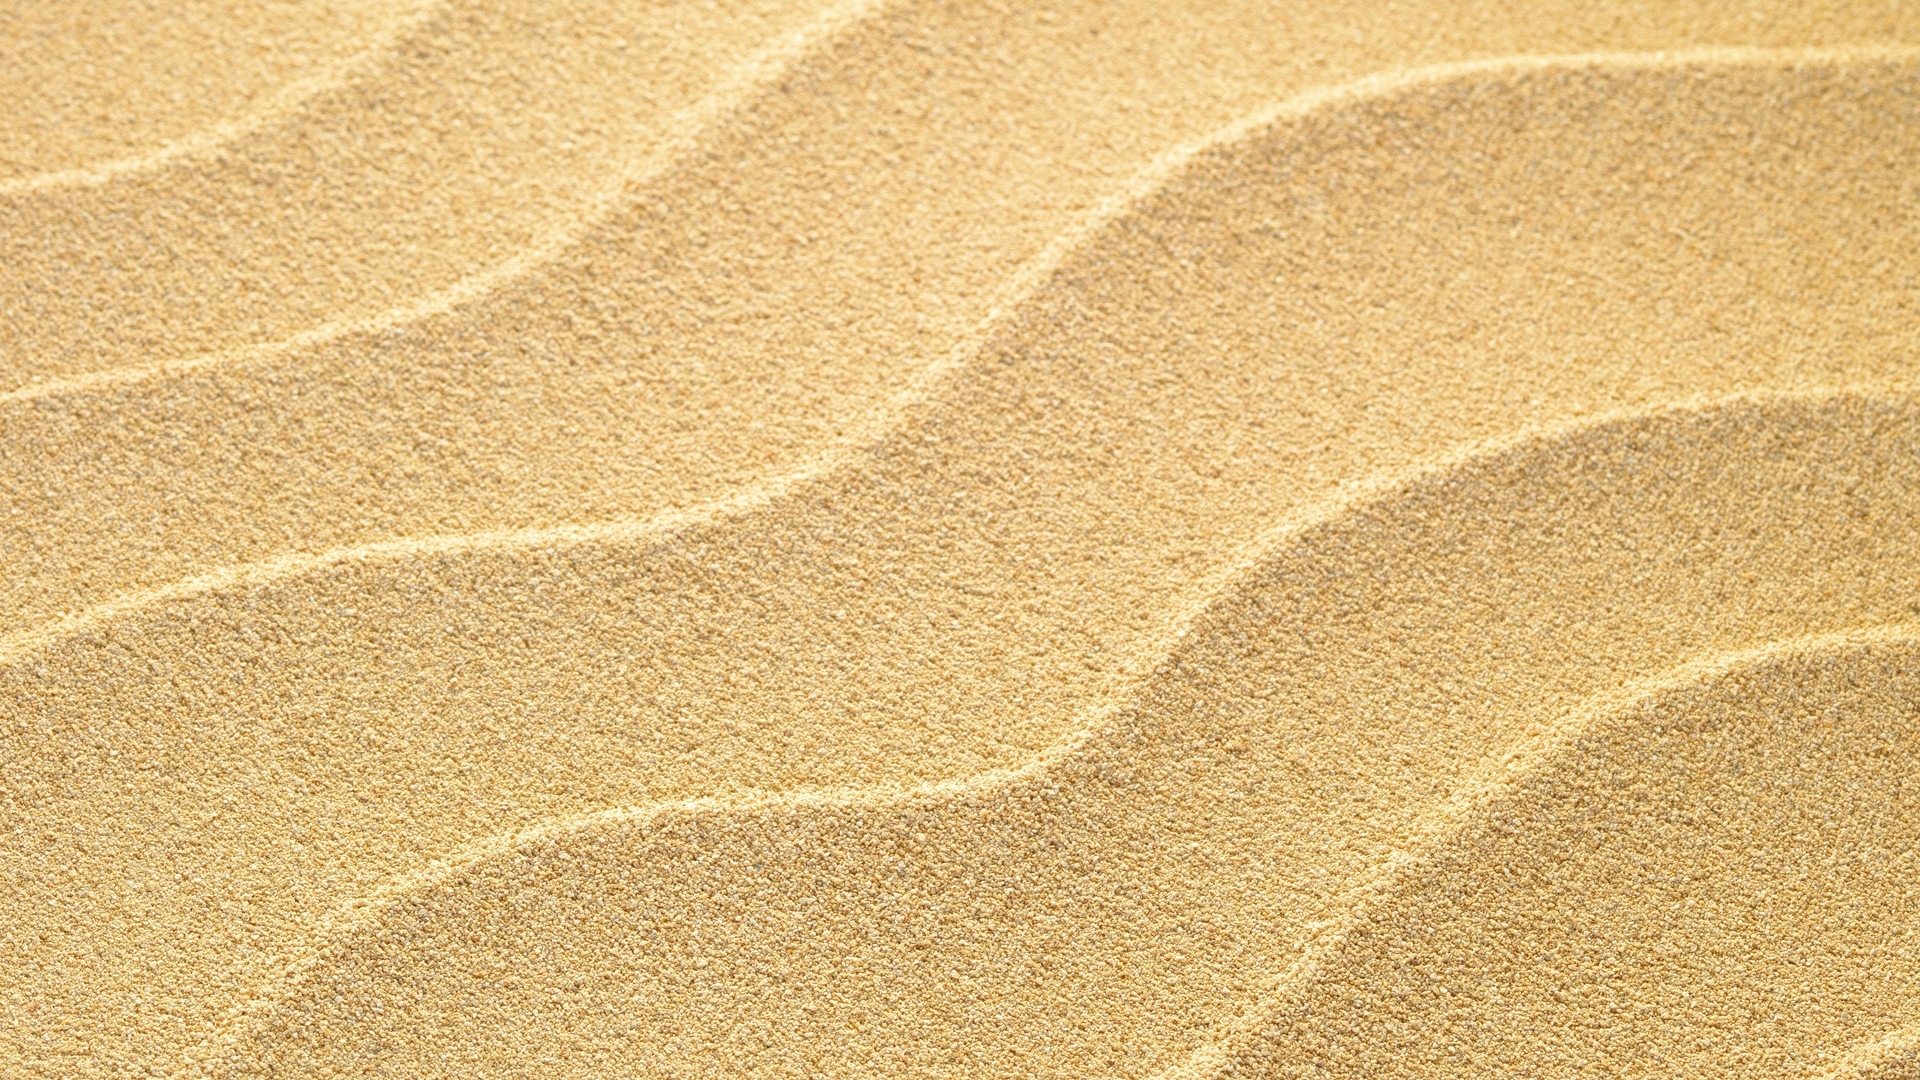 Only sand texture - HD wallpaper download. Wallpapers, pictures, photos.